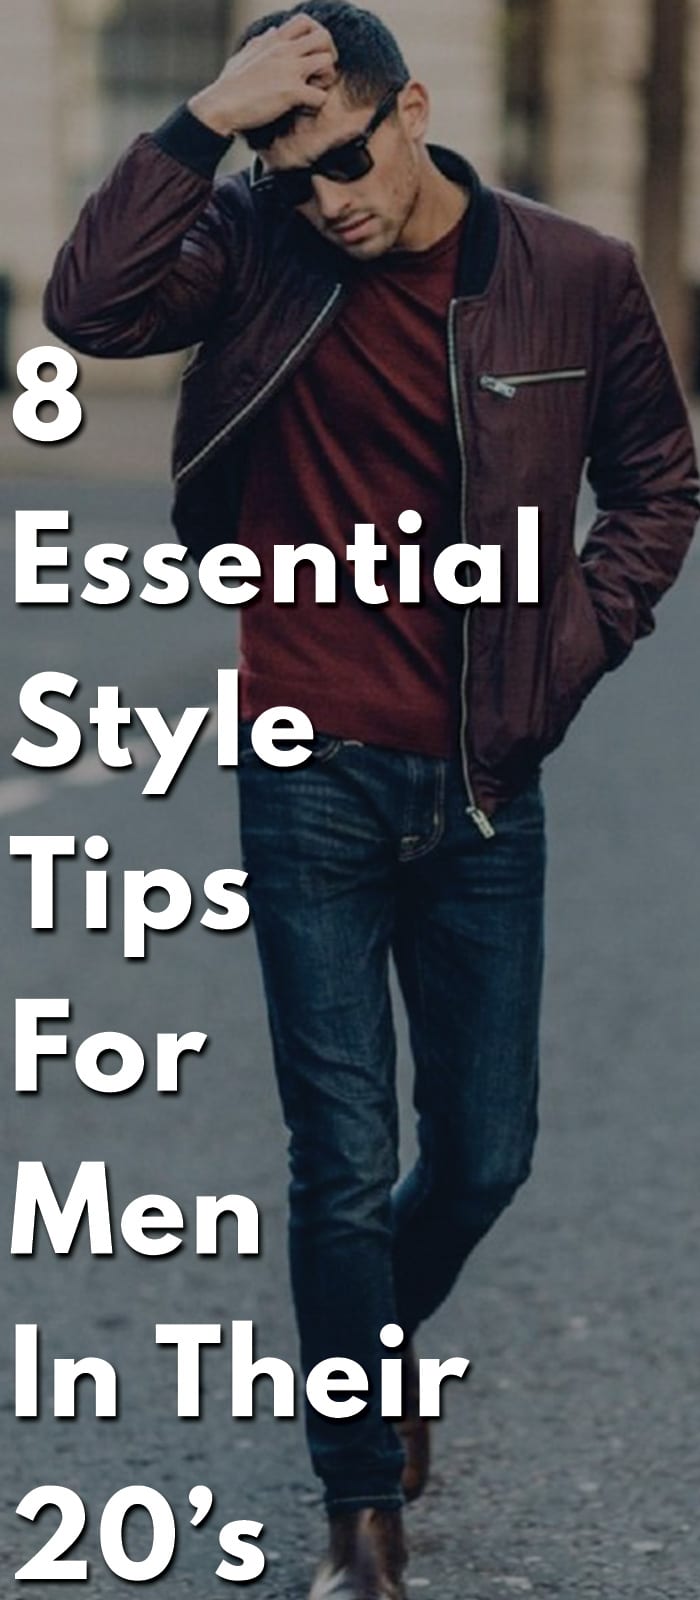 8-Essential-Style-tips-for-men-in-their-20’s